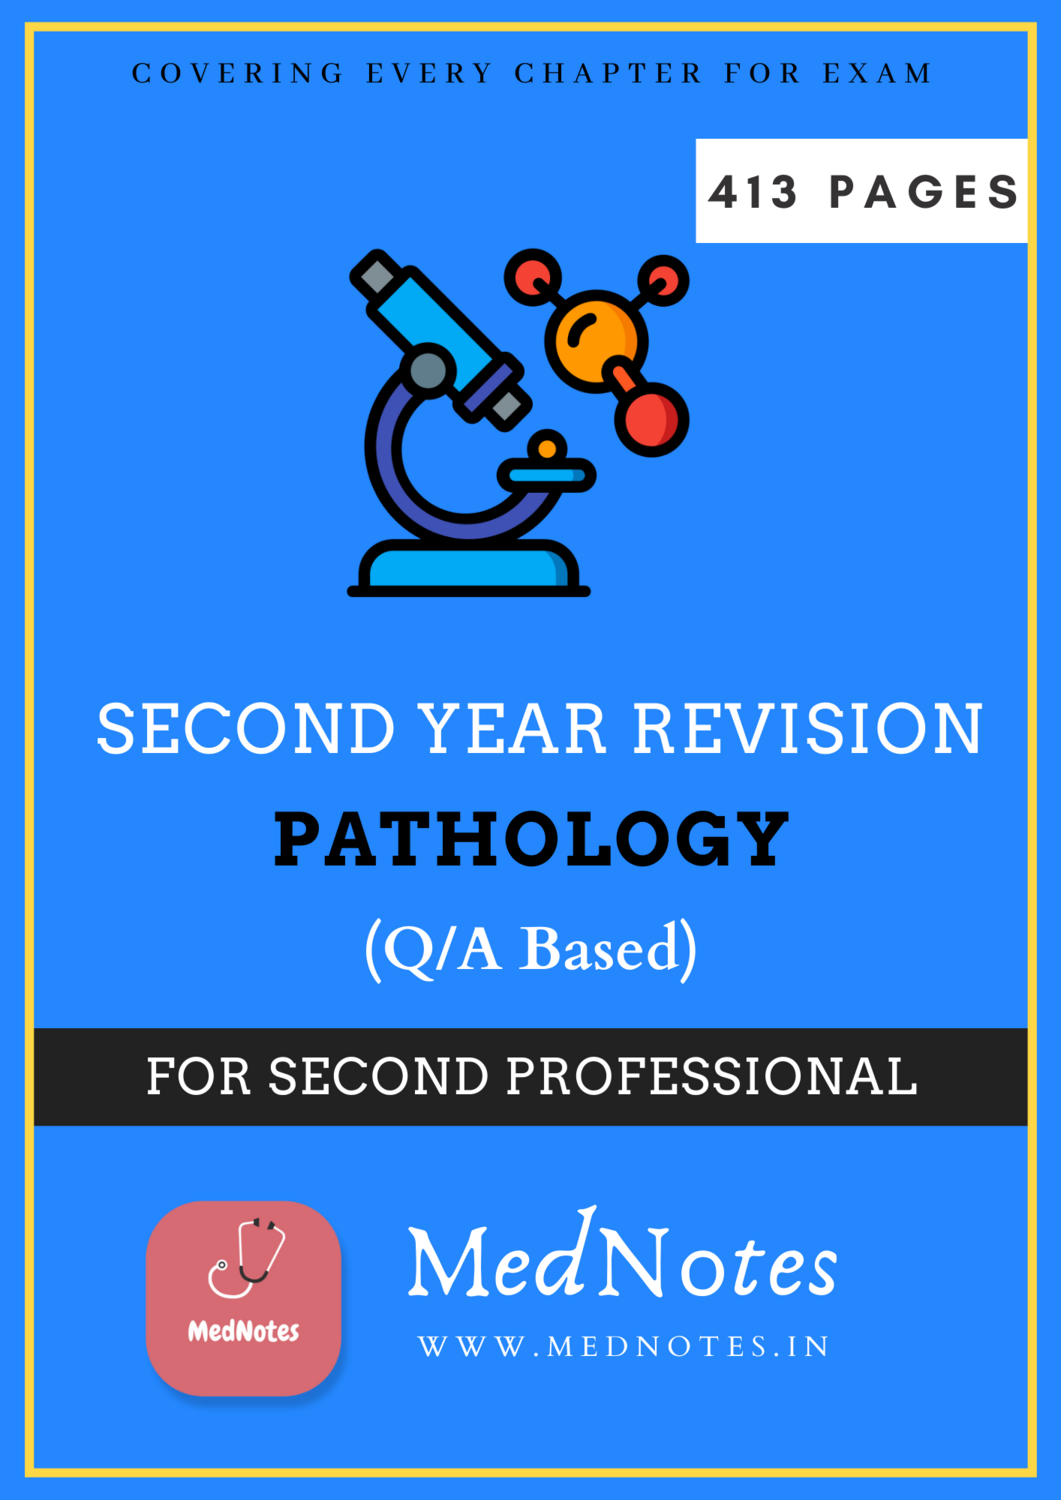 Full Pathology Revision - Second Professional